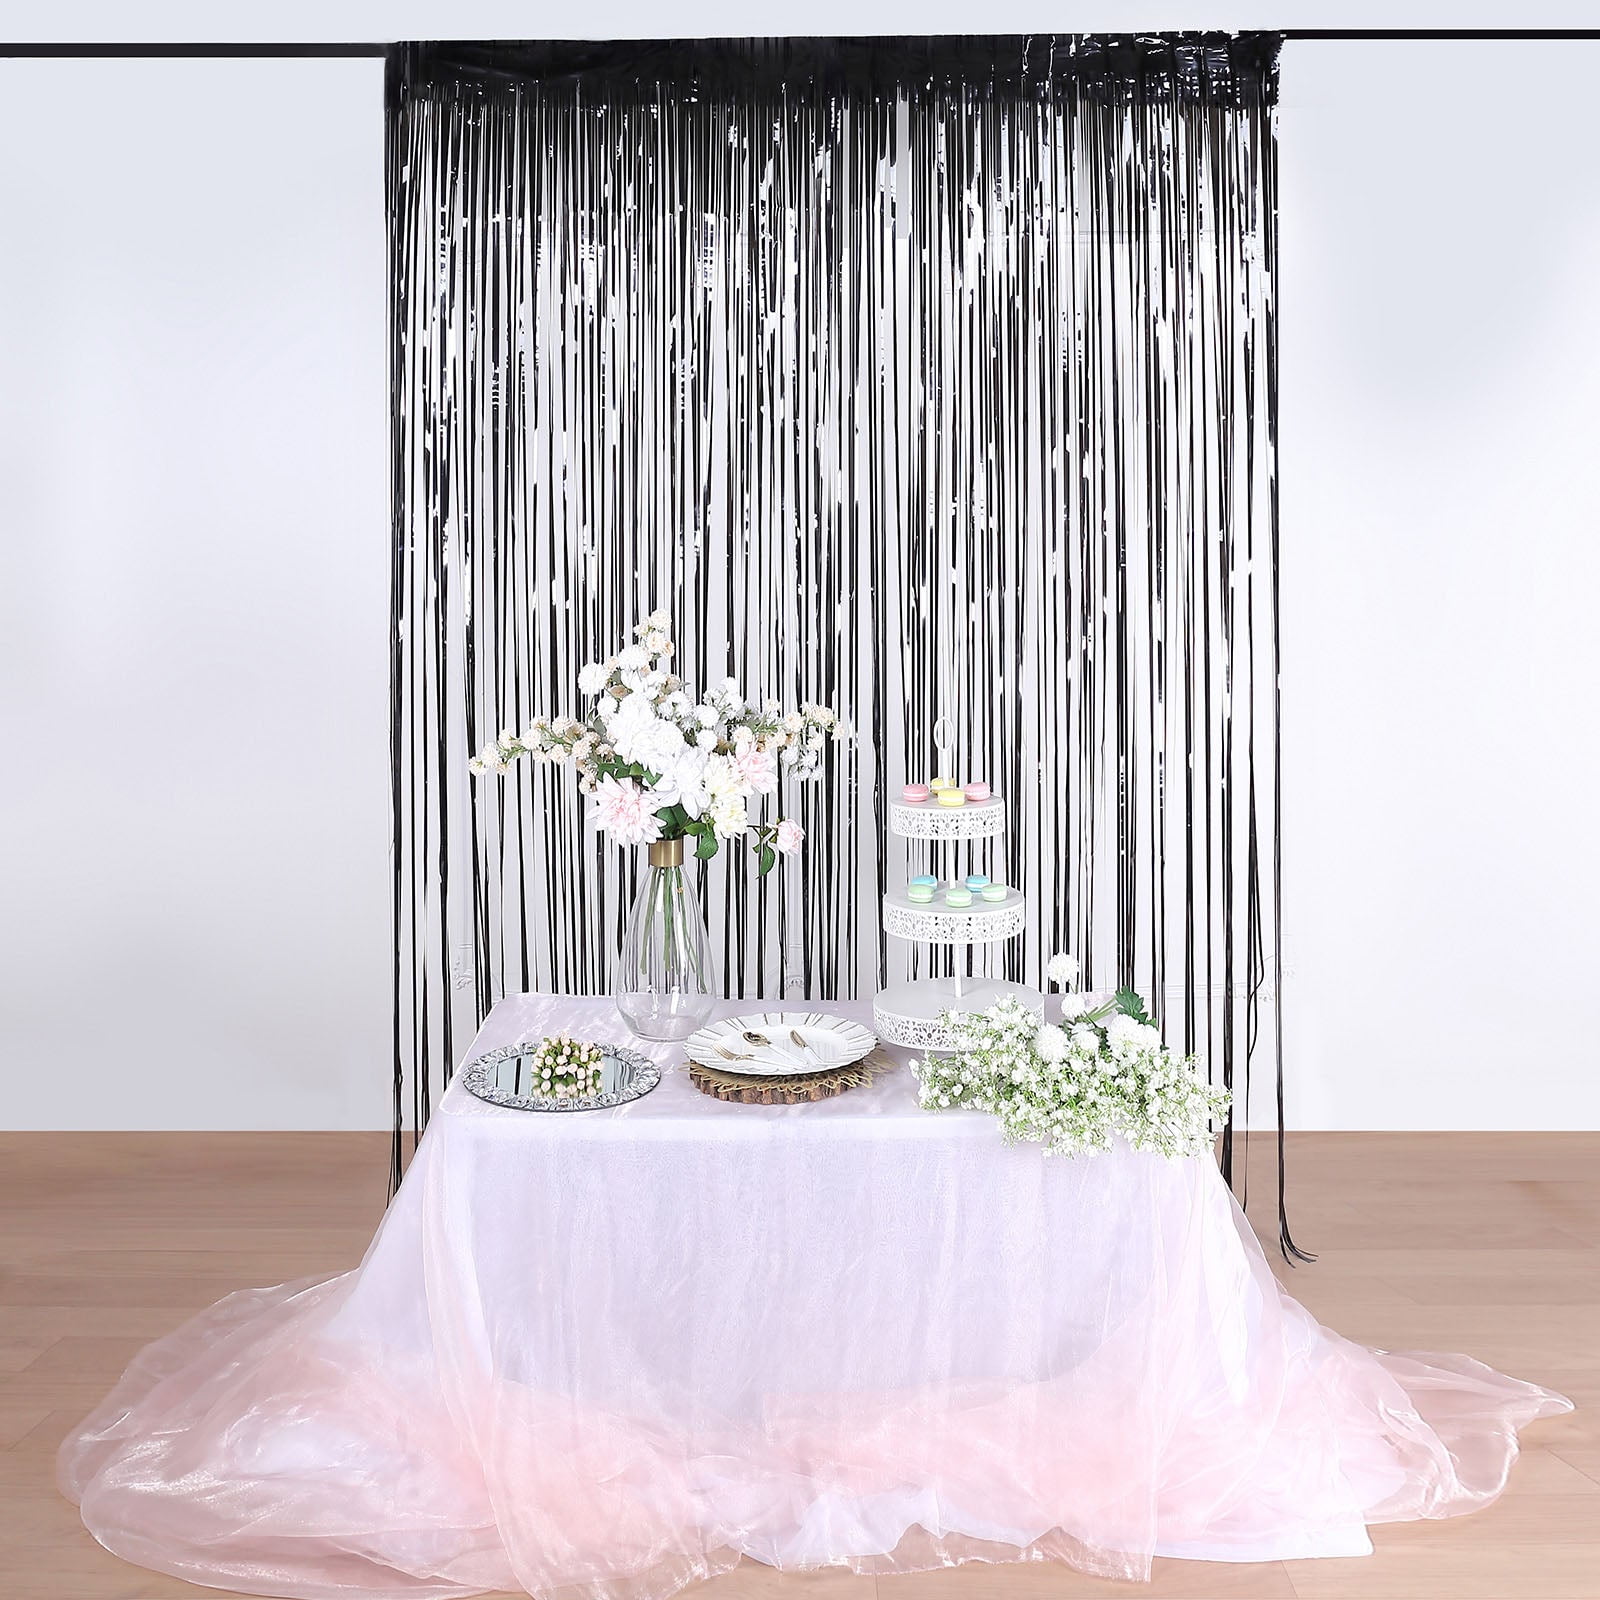 Veki Foil Curtains Curtain For Birthday Wedding Party Bright Rain Curtain  Party Decoration Rain Curtain Party Favors for Kids 8-12 Goodie Bags Boys 